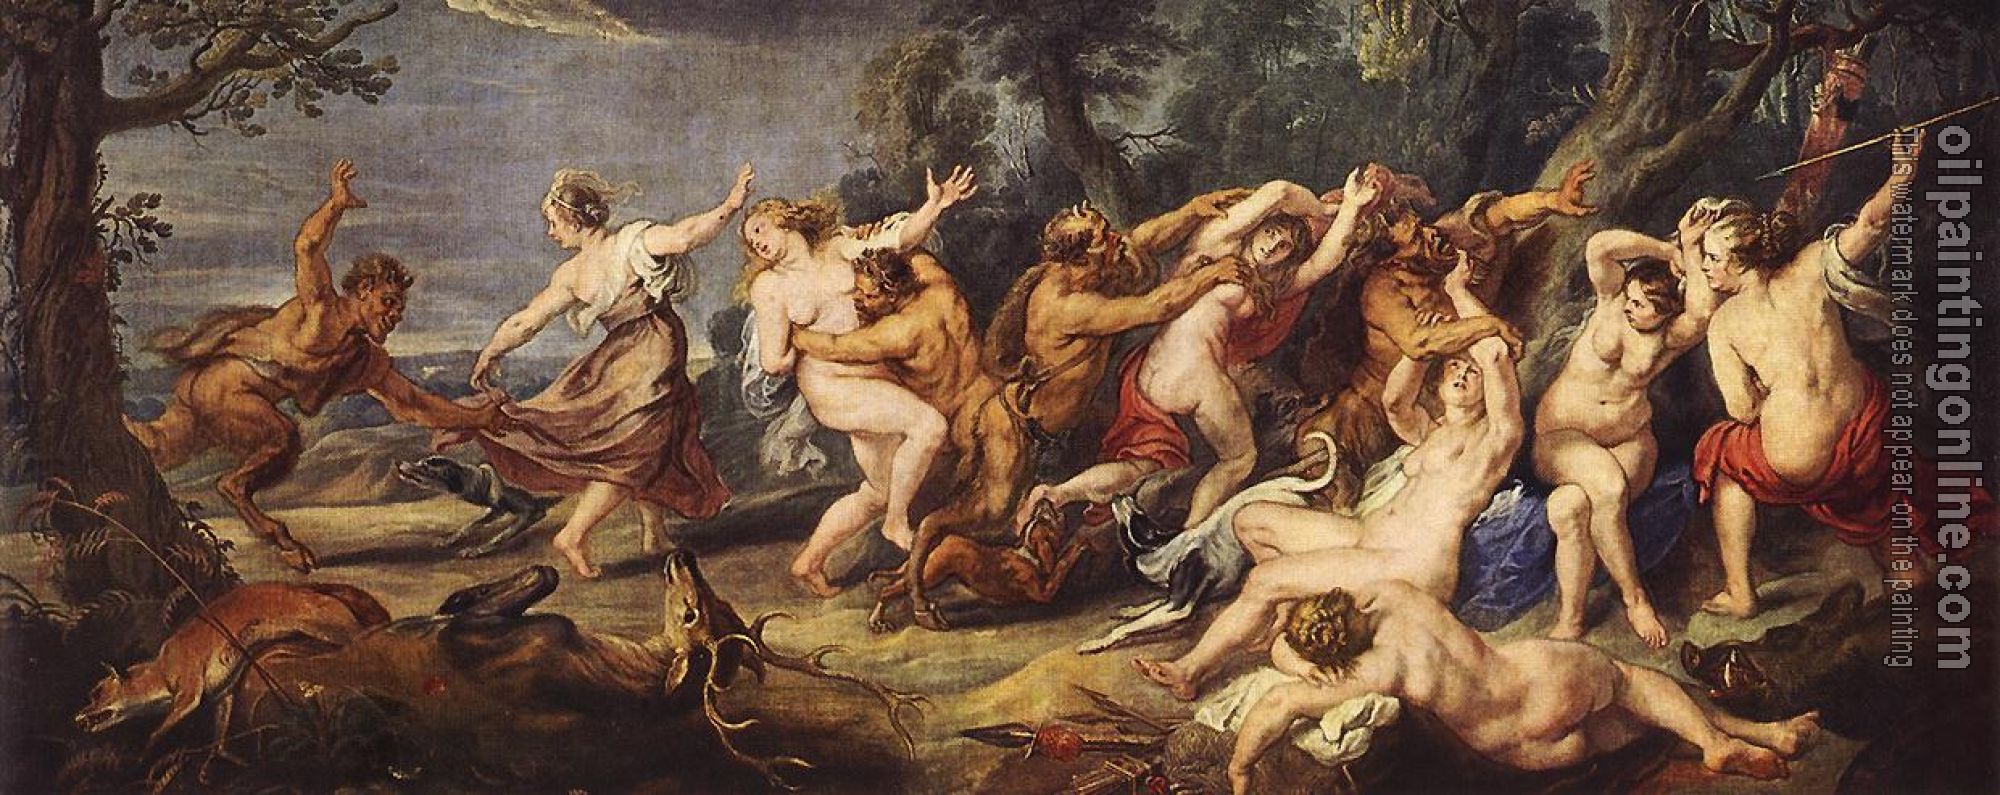 Rubens, Peter Paul - Diana and her Nymphs Surprised by the Fauns